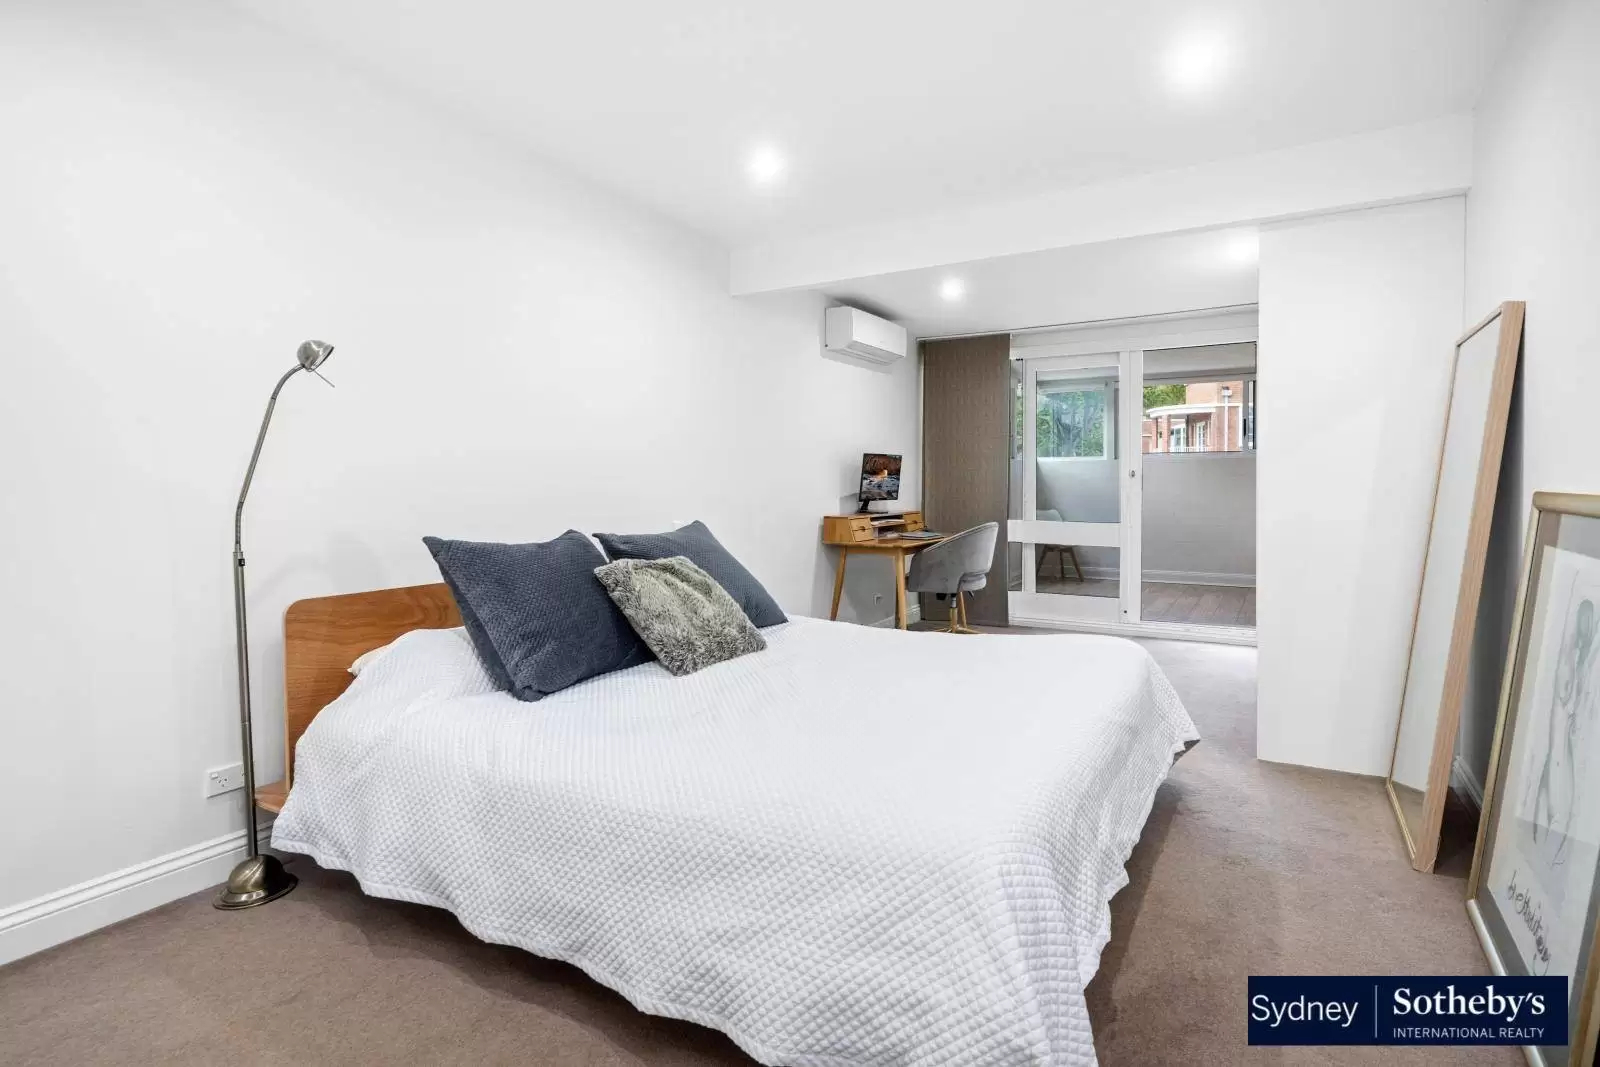 9 Pearce Street, Double Bay Leased by Sydney Sotheby's International Realty - image 7